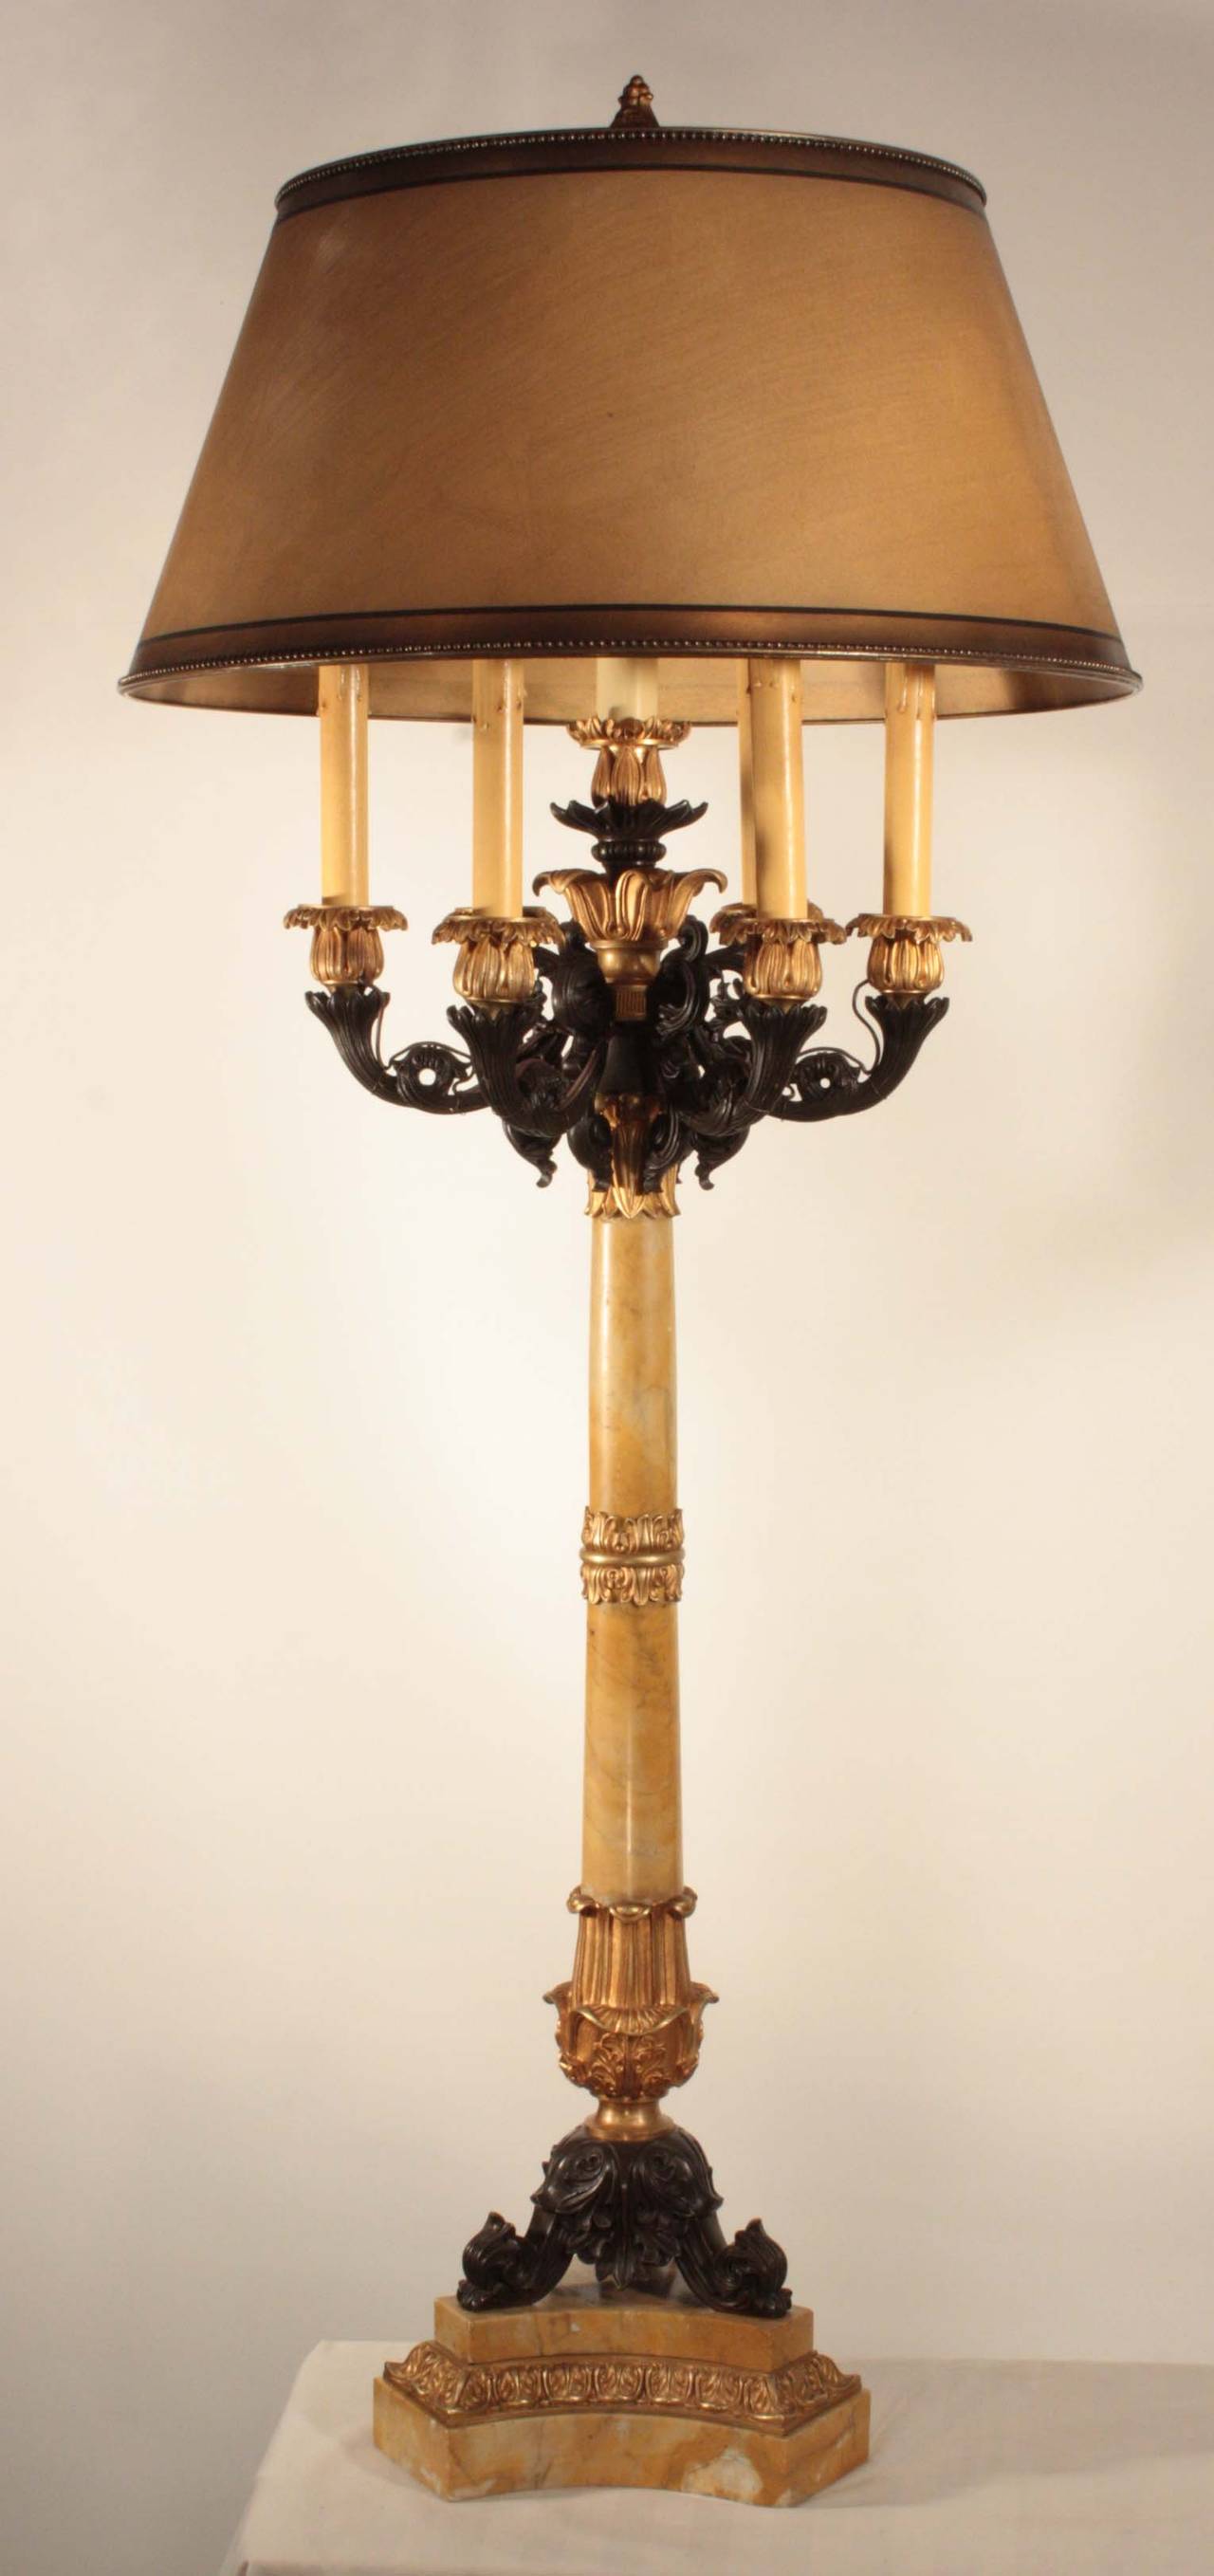 Pair of impressive French Restauration candelabra, now mounted as lamps, each seven-light gilt and oxidized bronze candelabrum mounted on a Sienna marble column supported on a gilt and oxidized trefoil base.

These are a happy union of Sienna marble